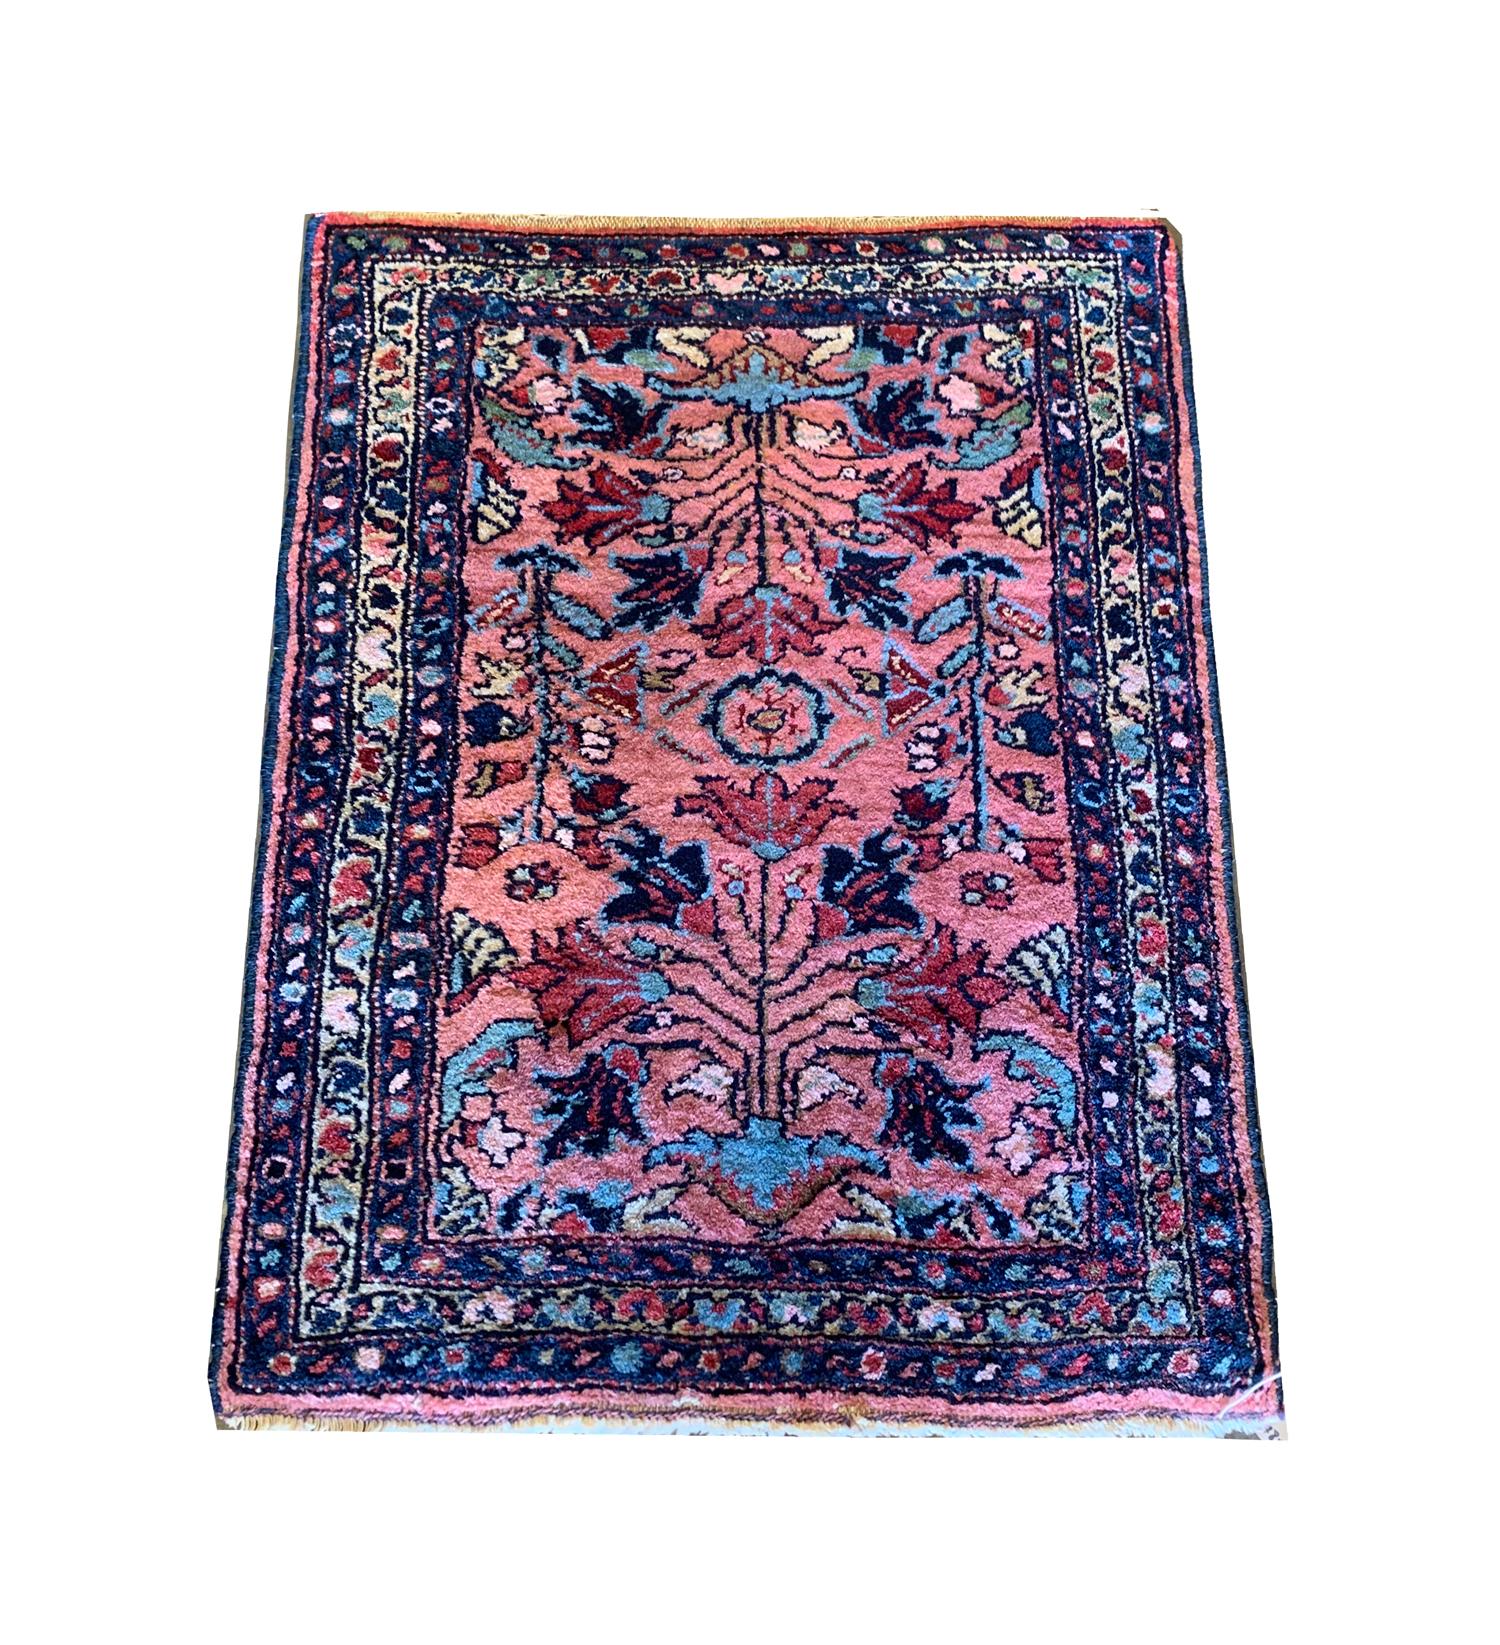 This fine wool rug was woven by hand in Azerbaijan country in the Caucasus region known for there bold design. The central design features a symmetrical floral pattern woven in blue, red, ivory on a pink background. This has then been framed by a